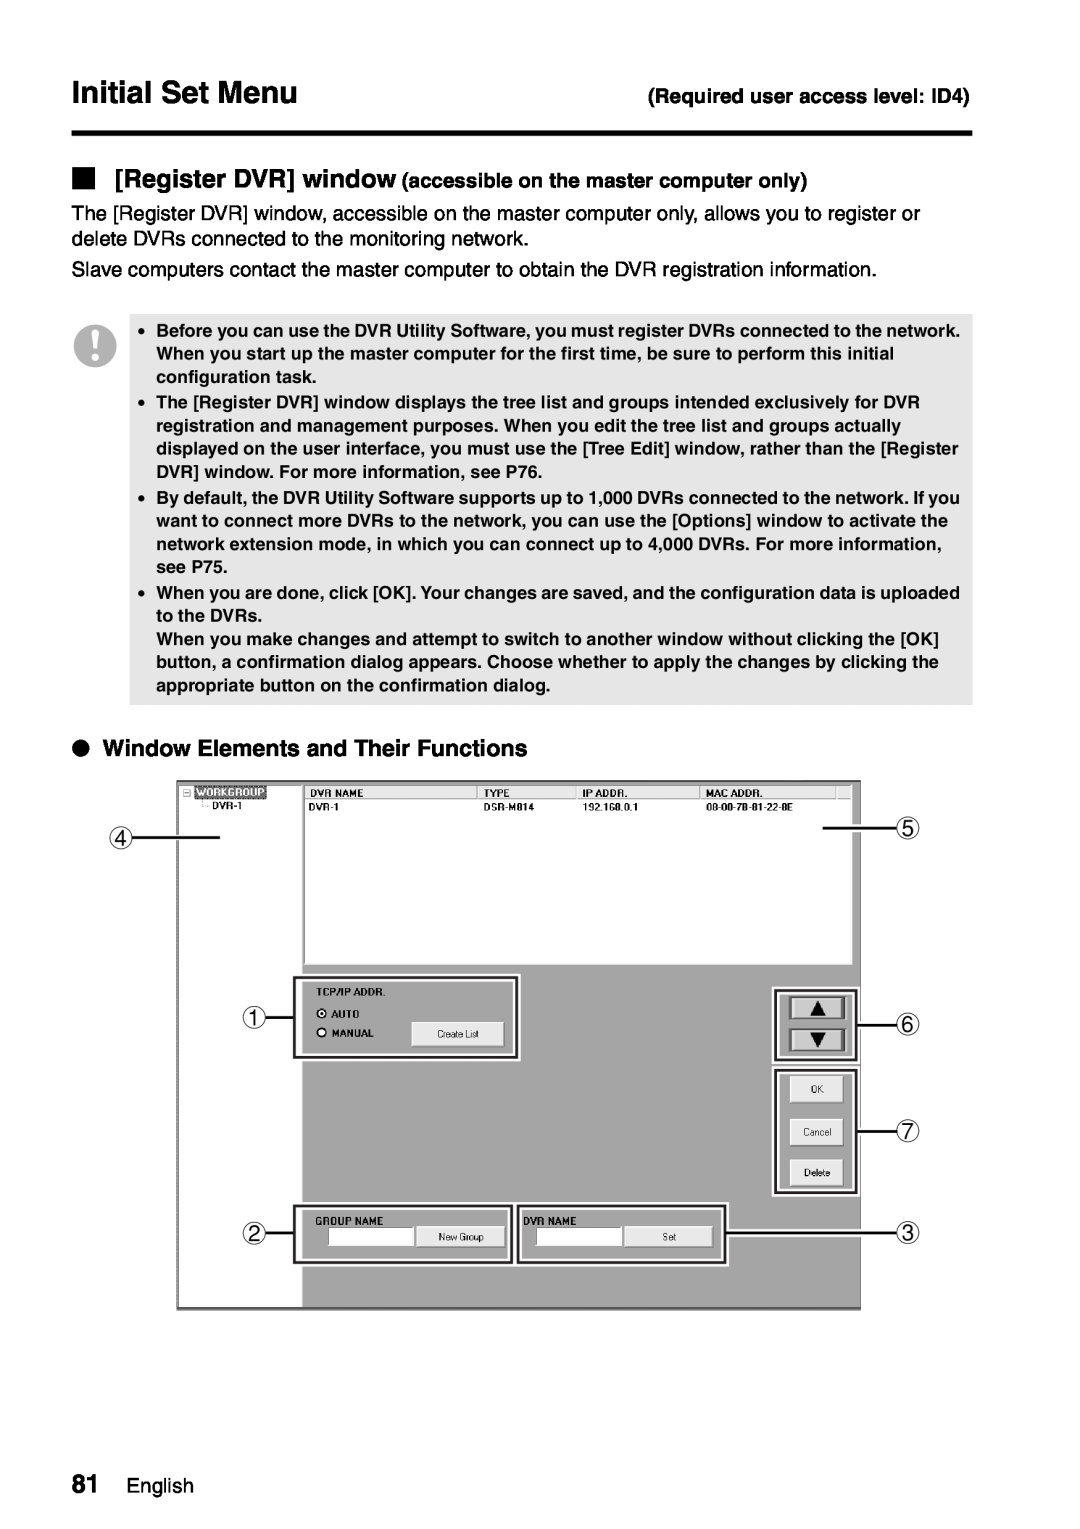 Sanyo VA-SW8000 4 1, 5 6 7, Initial Set Menu, Window Elements and Their Functions, Required user access level: ID4 